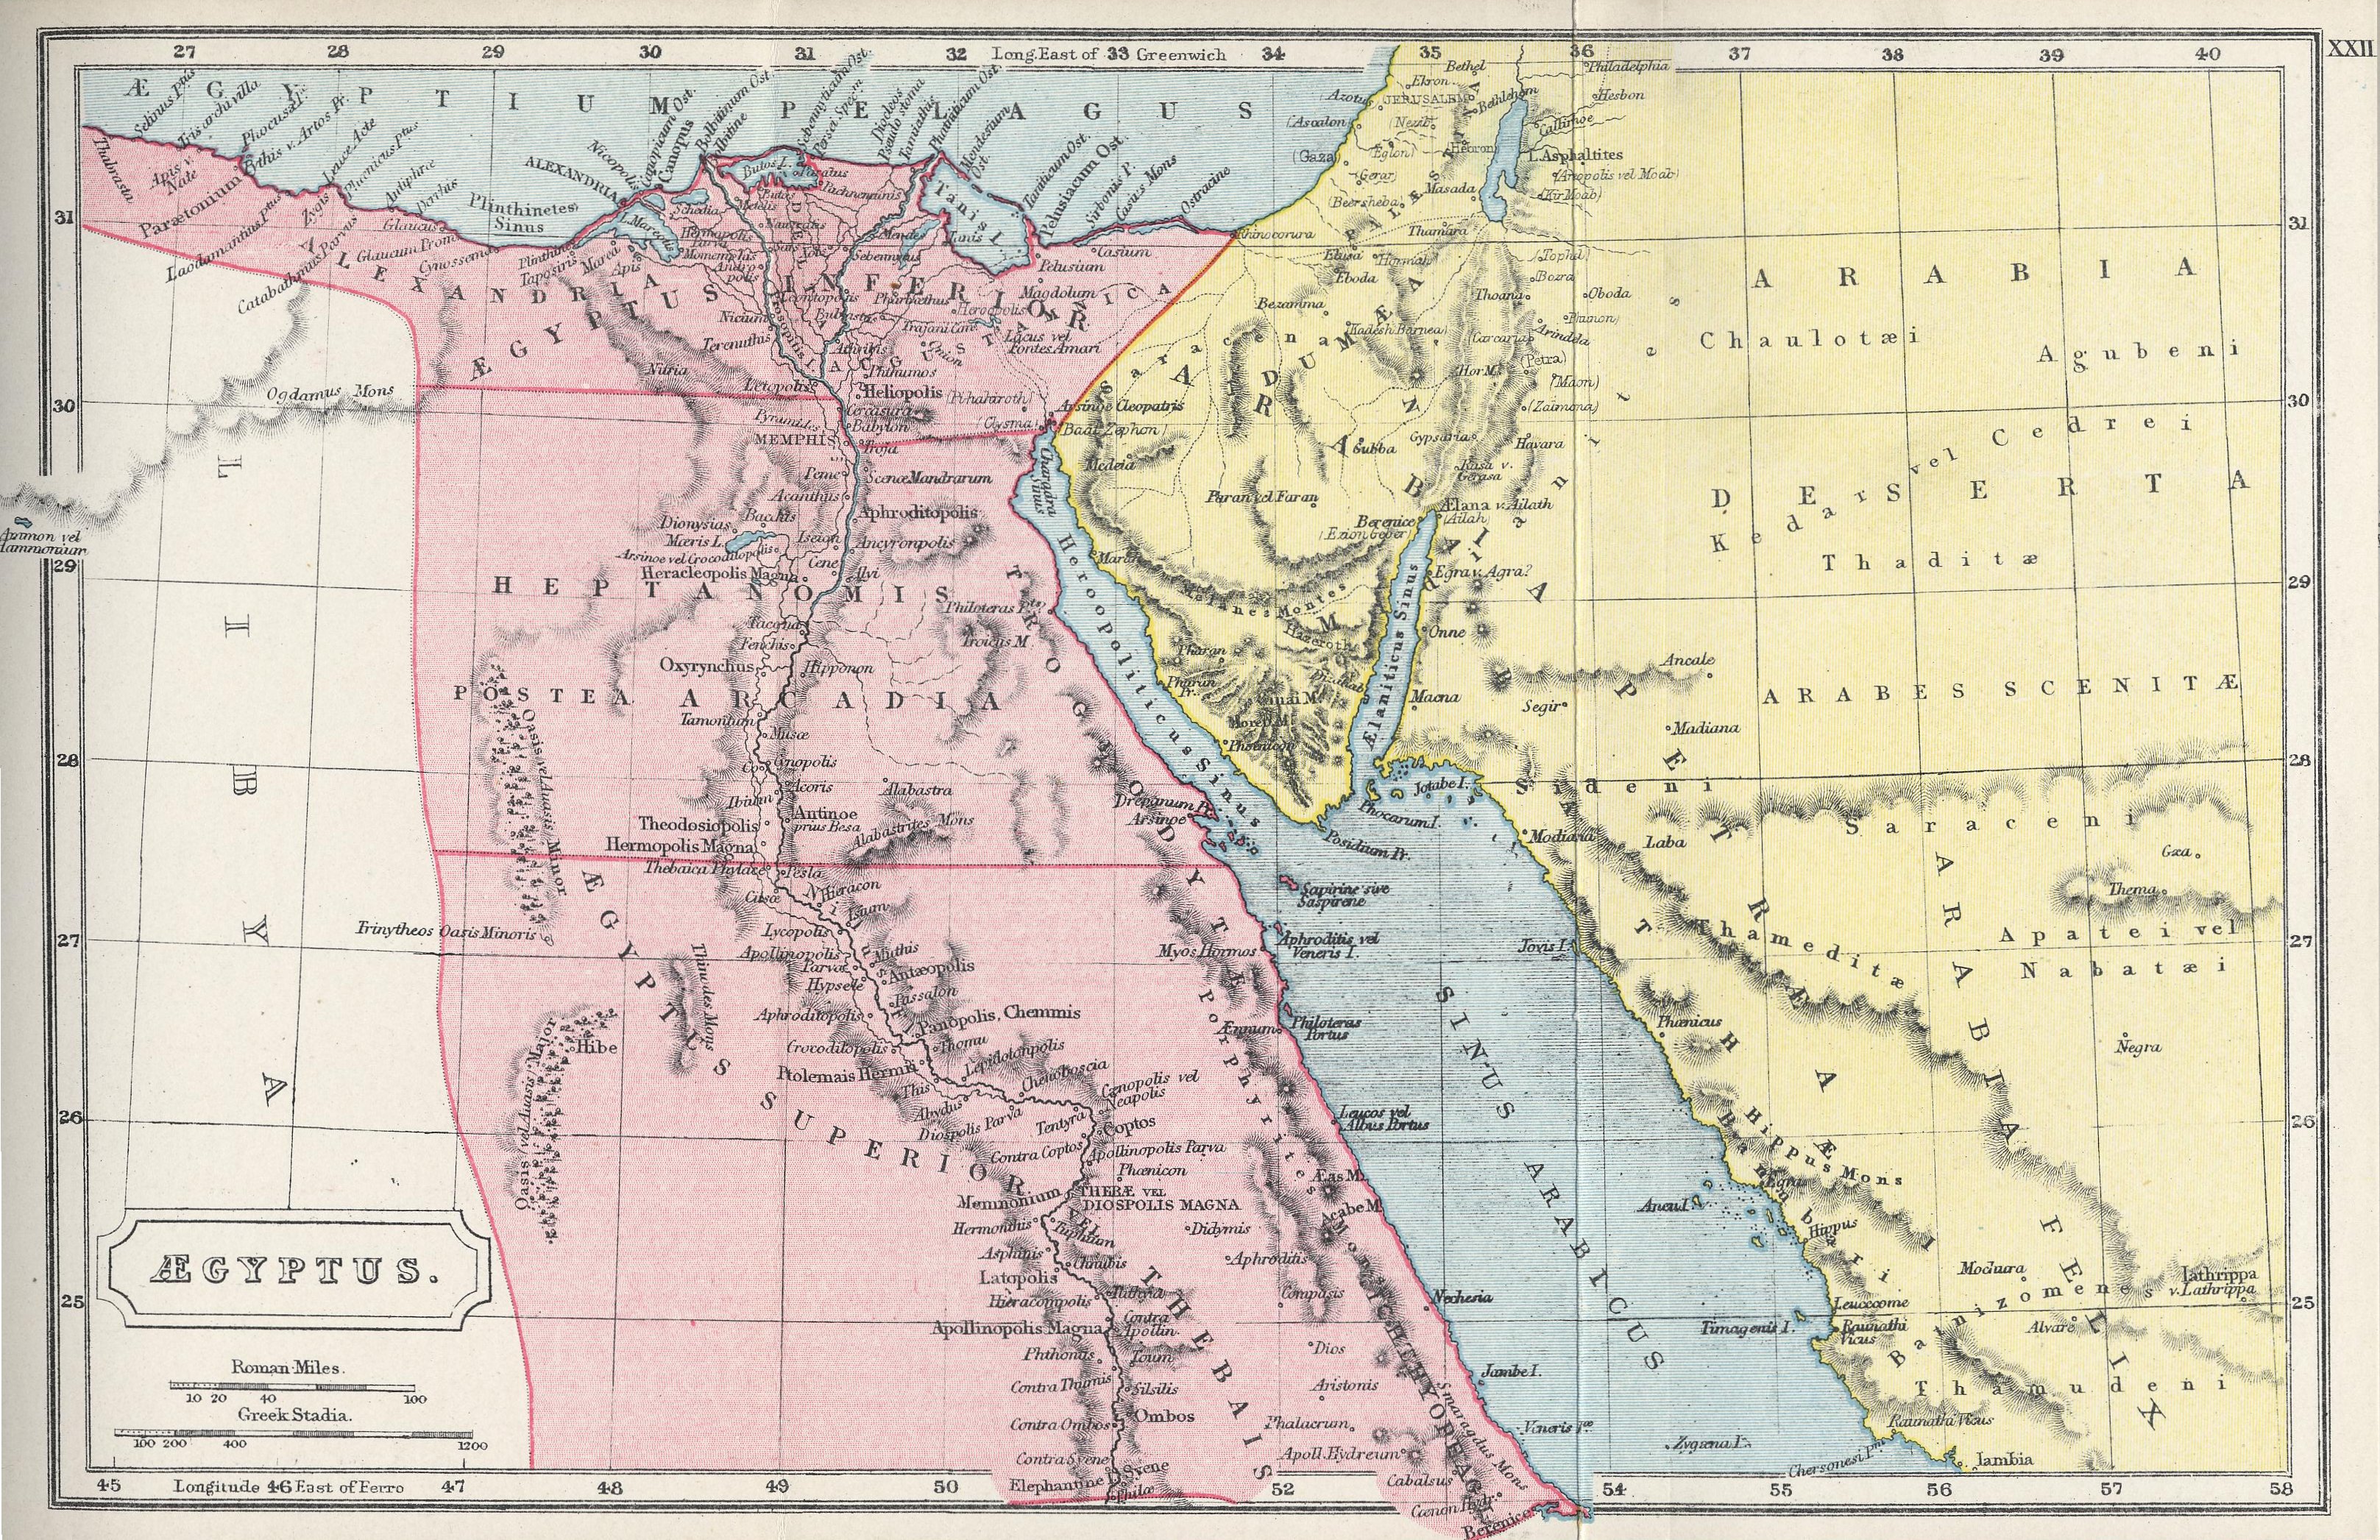 Map of Egypt70 BC - AD 180